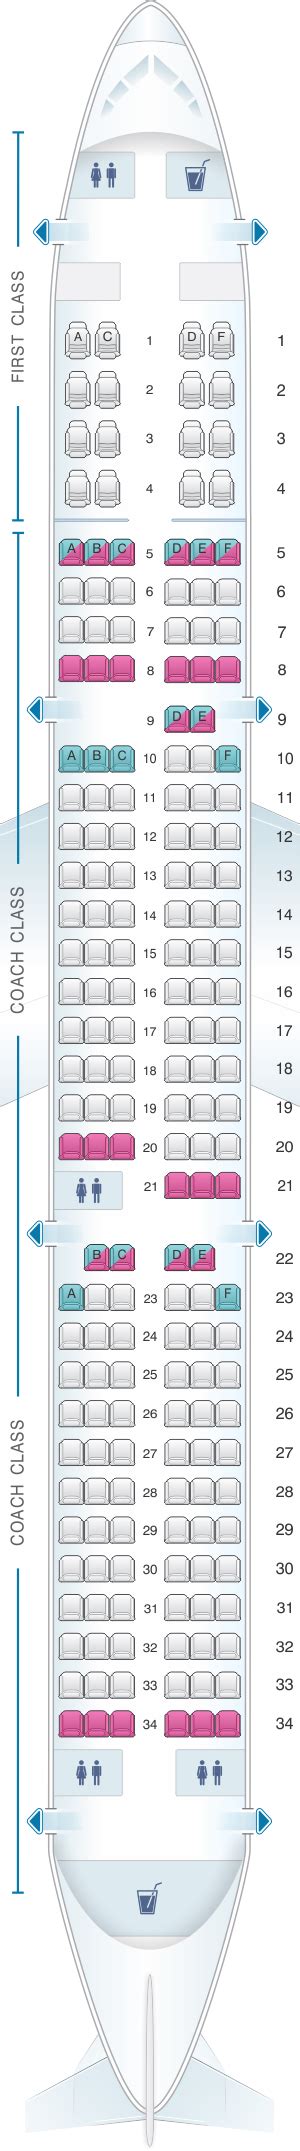 Aa Airbus A321neo Seat Map Image To U